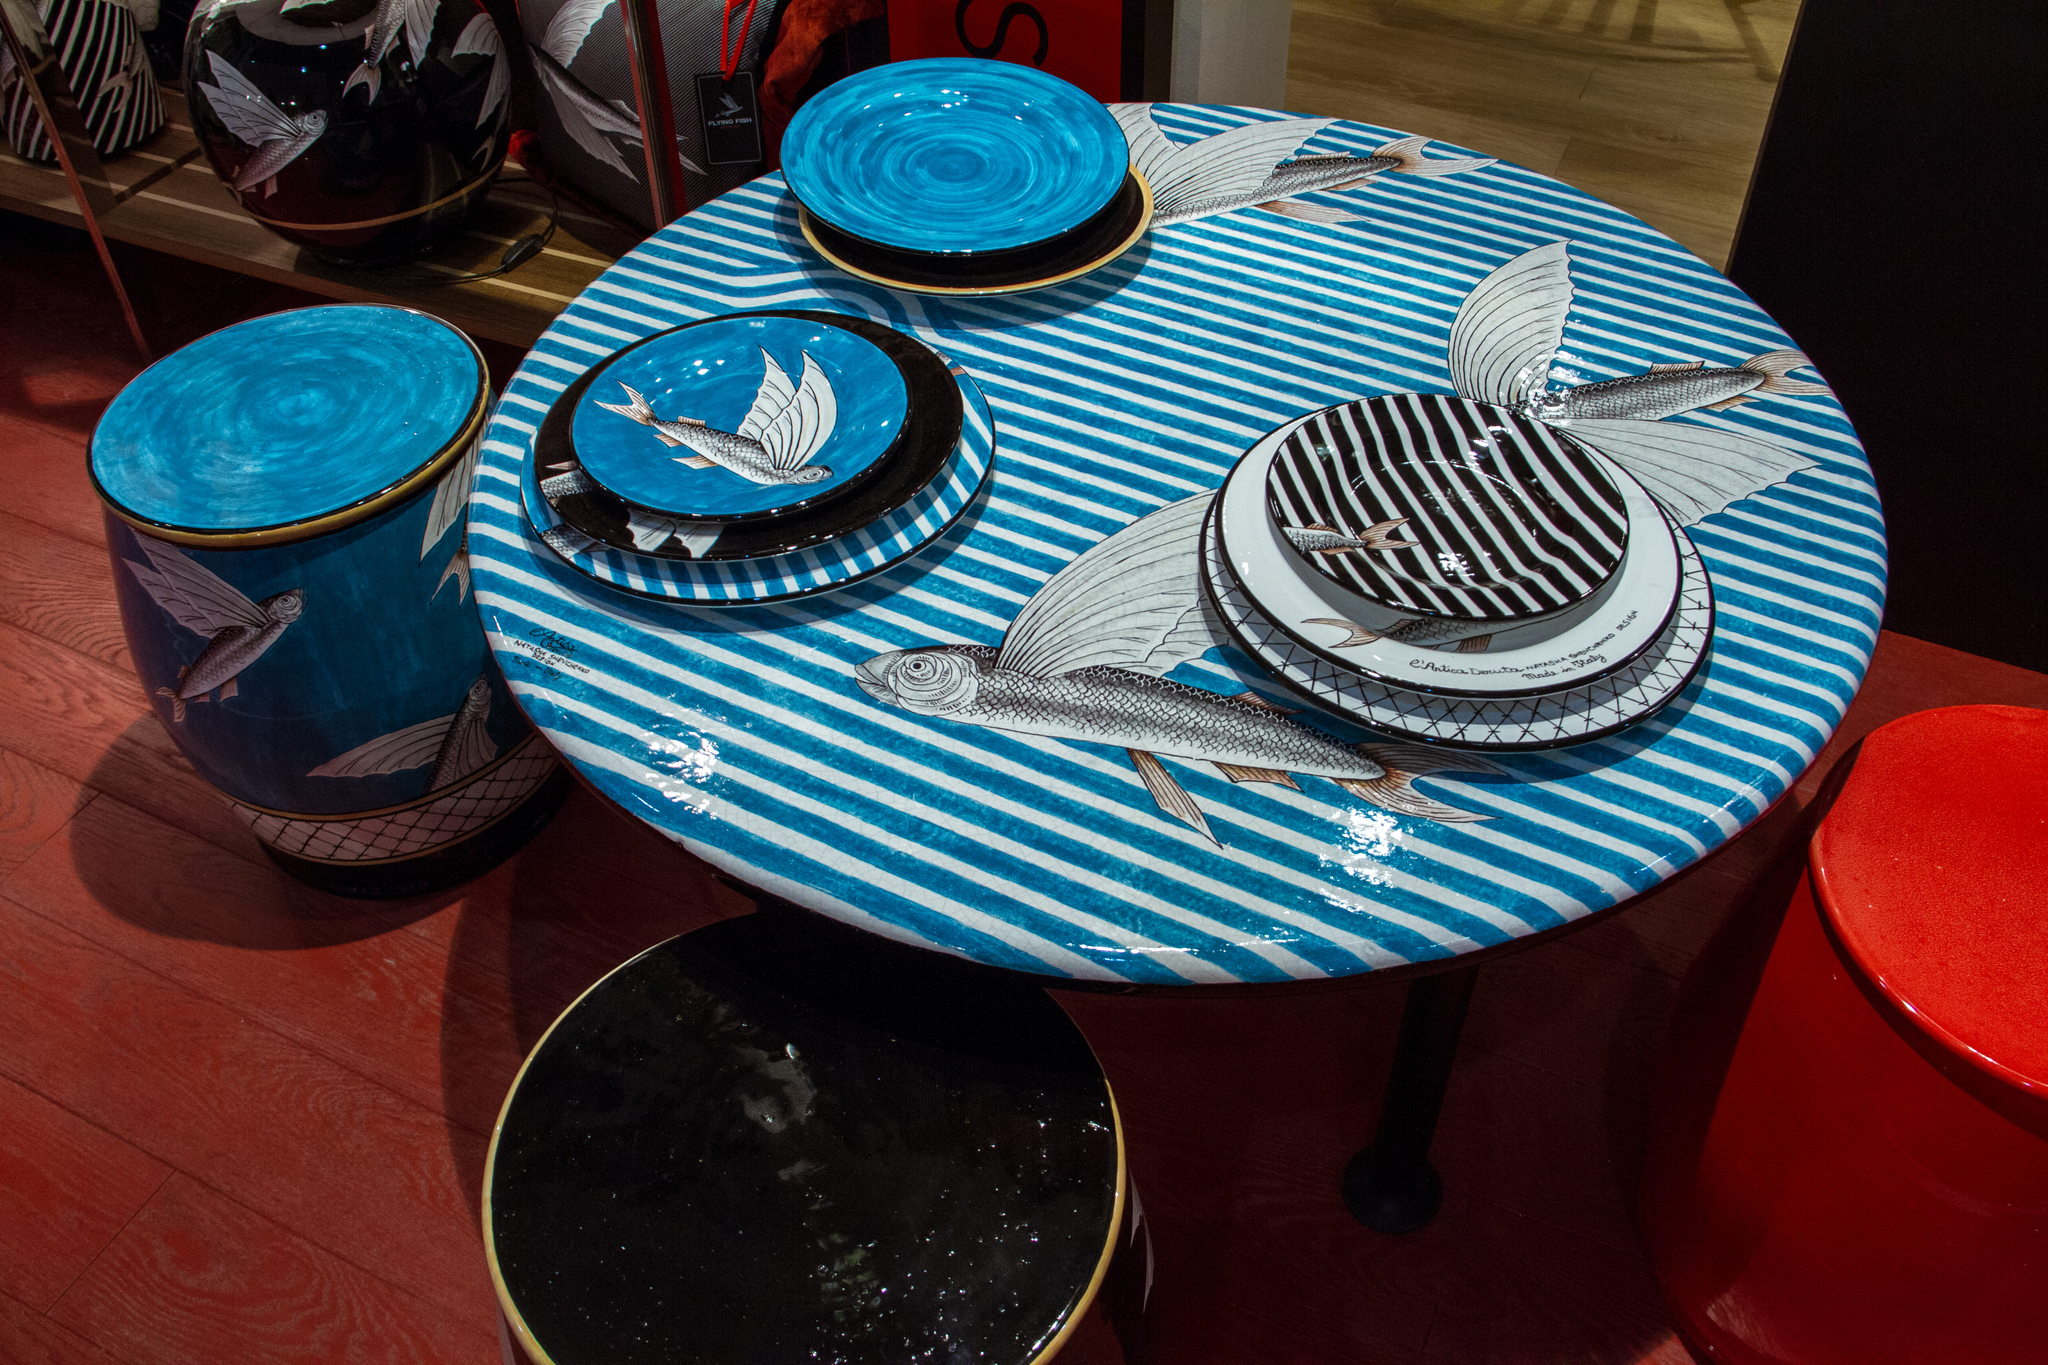 Set of plates Flying Fish collection, 4 pc.